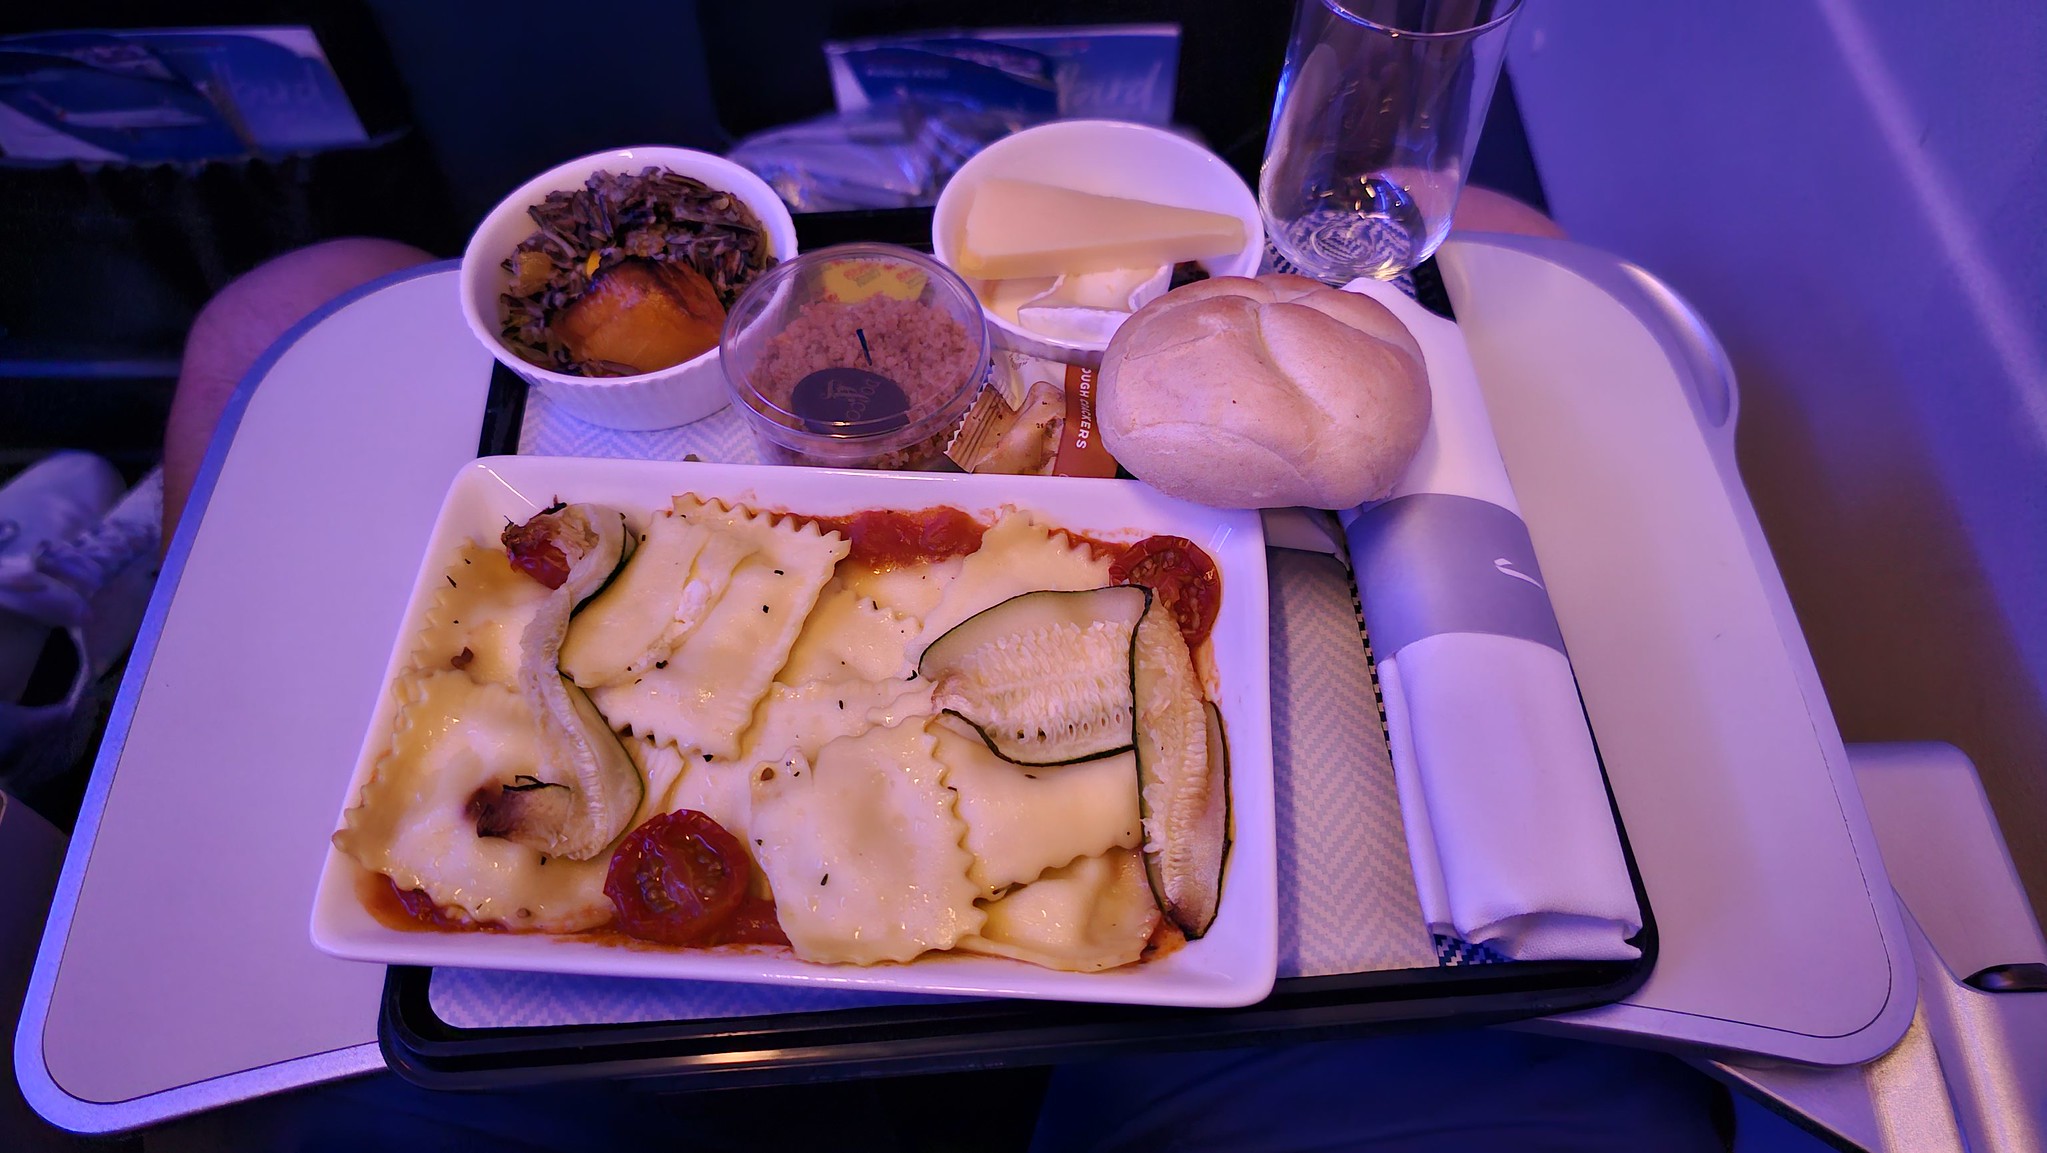 The ravioli meal offered on board the BA flight back to Heathrow